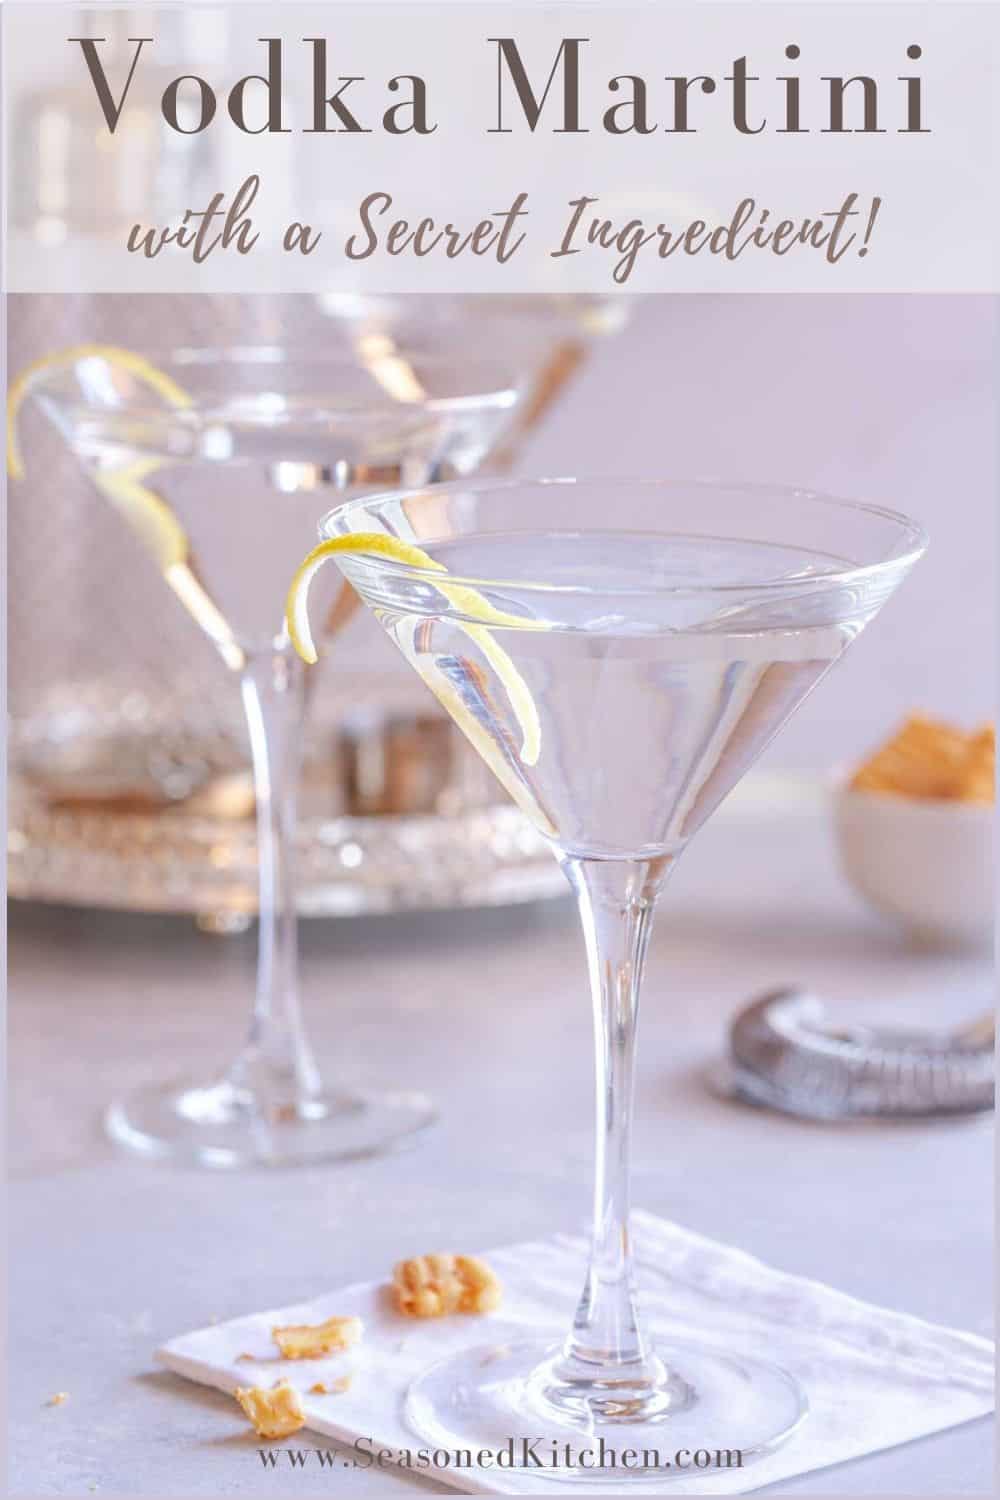 2 stemmed glasses holding vodka martinis with twists, with a shaker in the background